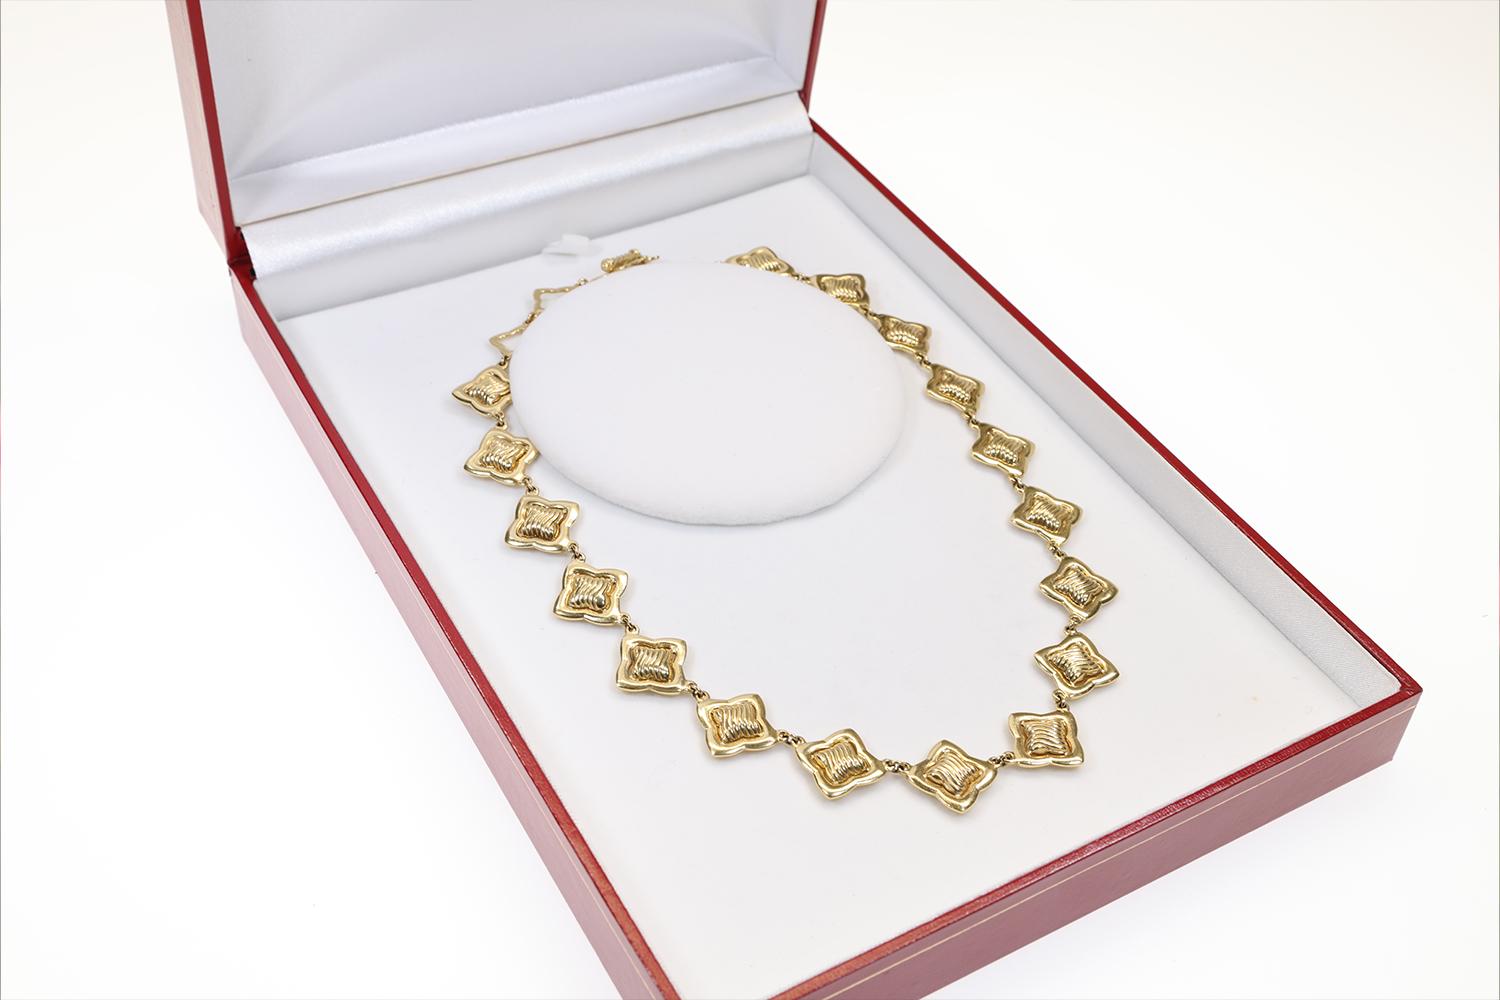 Rare David Yurman Quatrefoil 18K Solid Yellow Gold Necklace Limited Series Piece For Sale 3